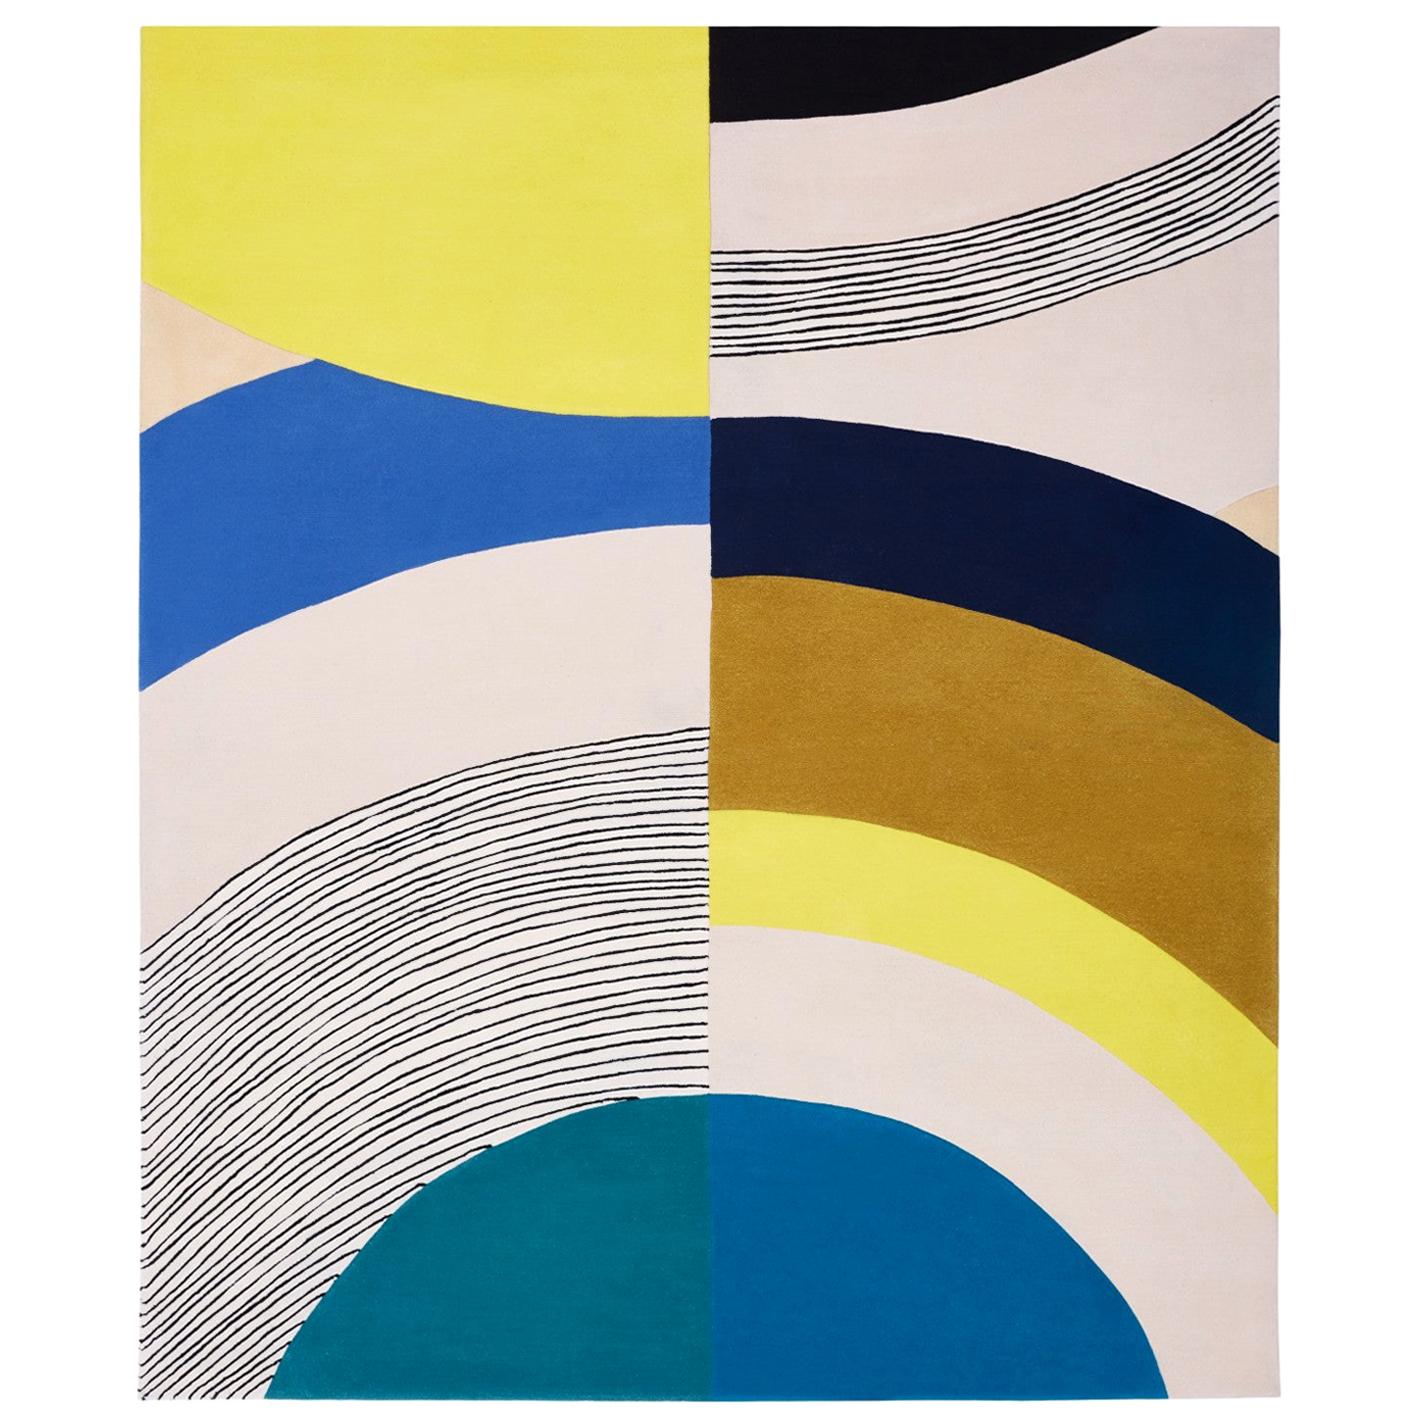 Contemporary Colorful Rug Inspired by Seoul's Aesthetic